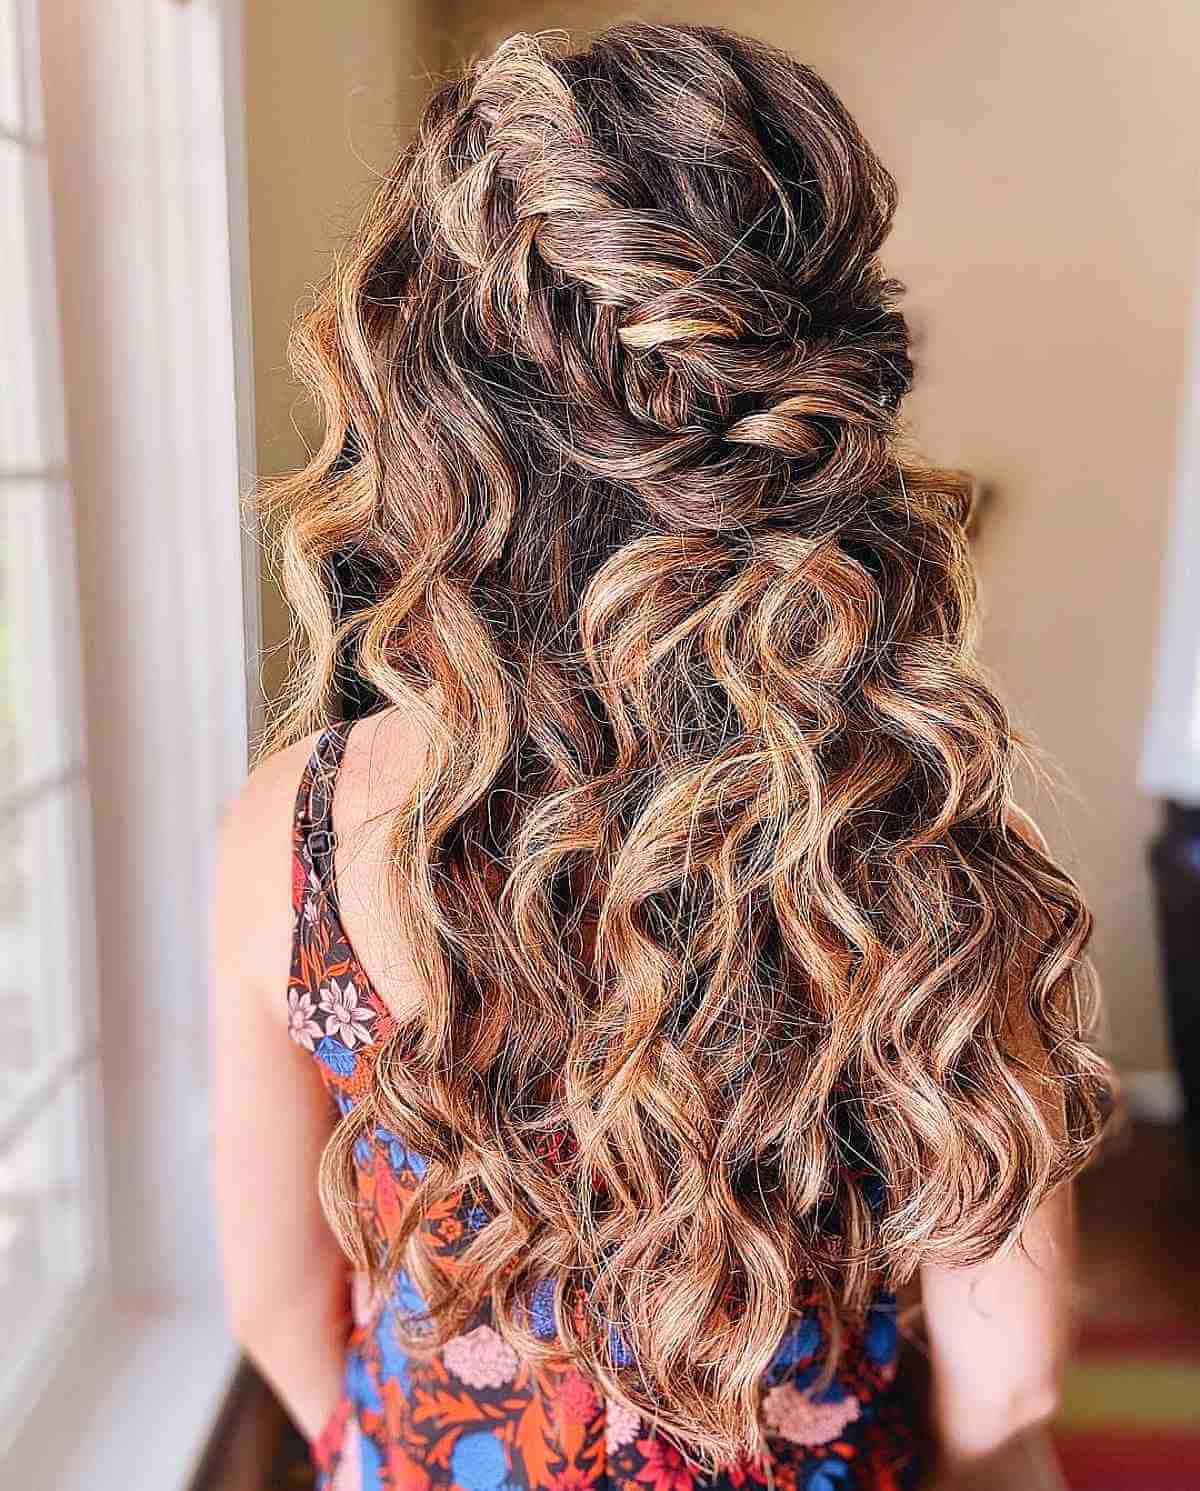 How To Do a Side Braid - Stylish Life for Moms-lmd.edu.vn